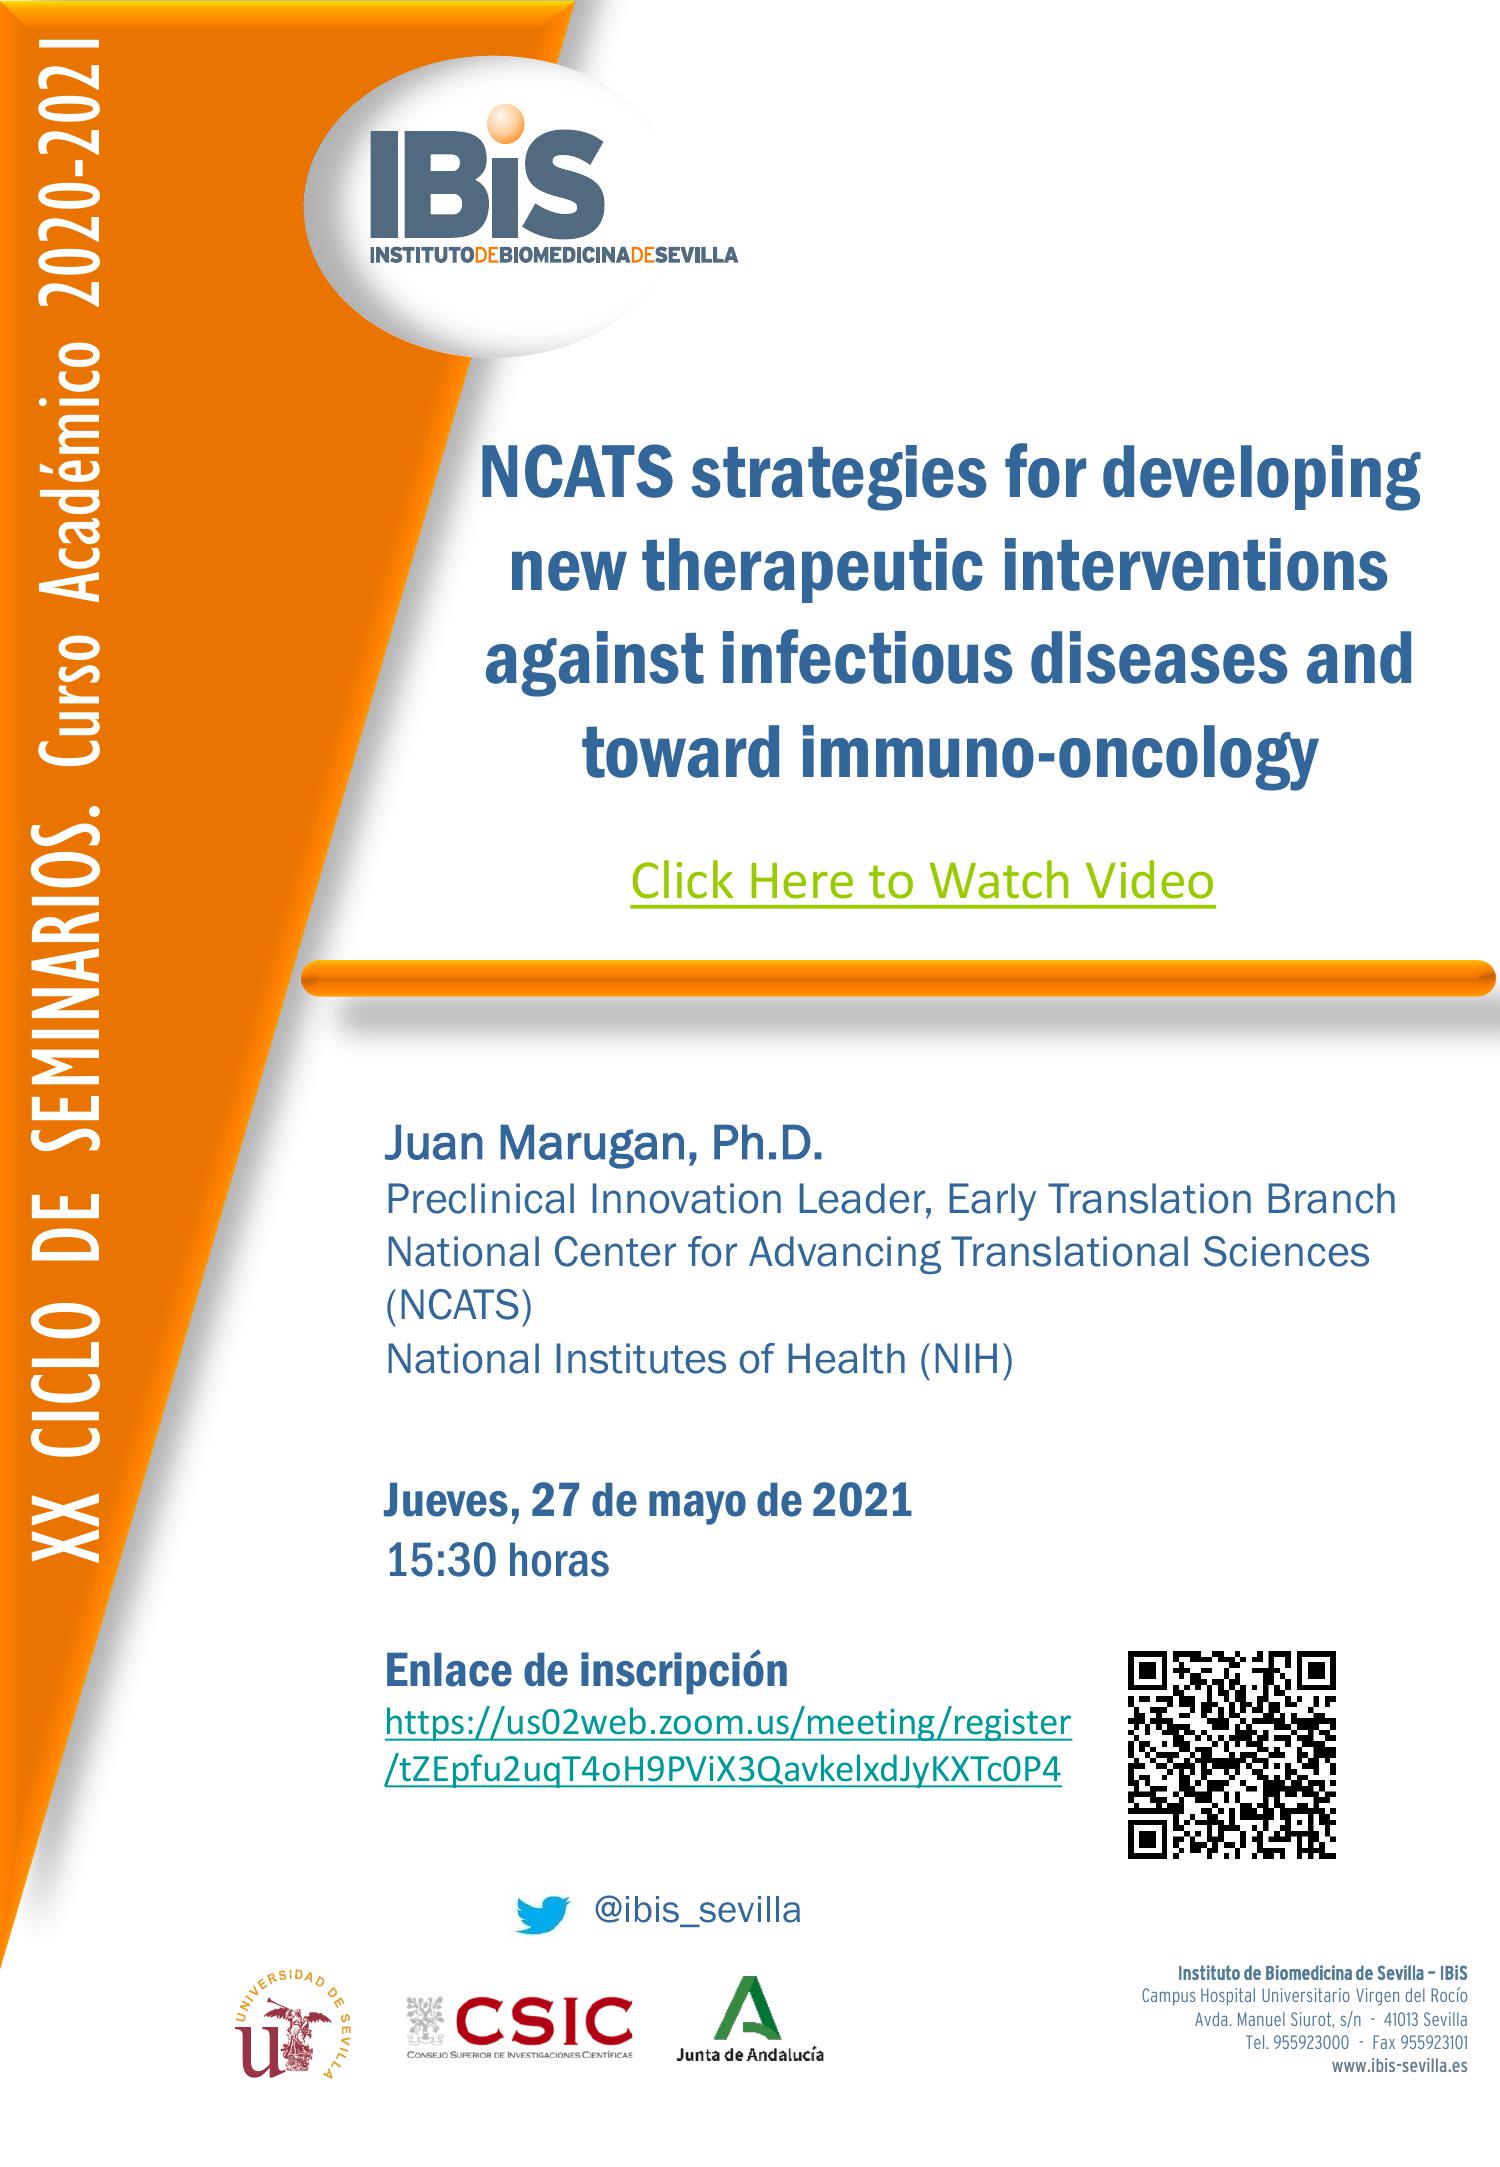 Poster: NCATS strategies for developing new therapeutic interventions against infectious diseases and toward immuno-oncology